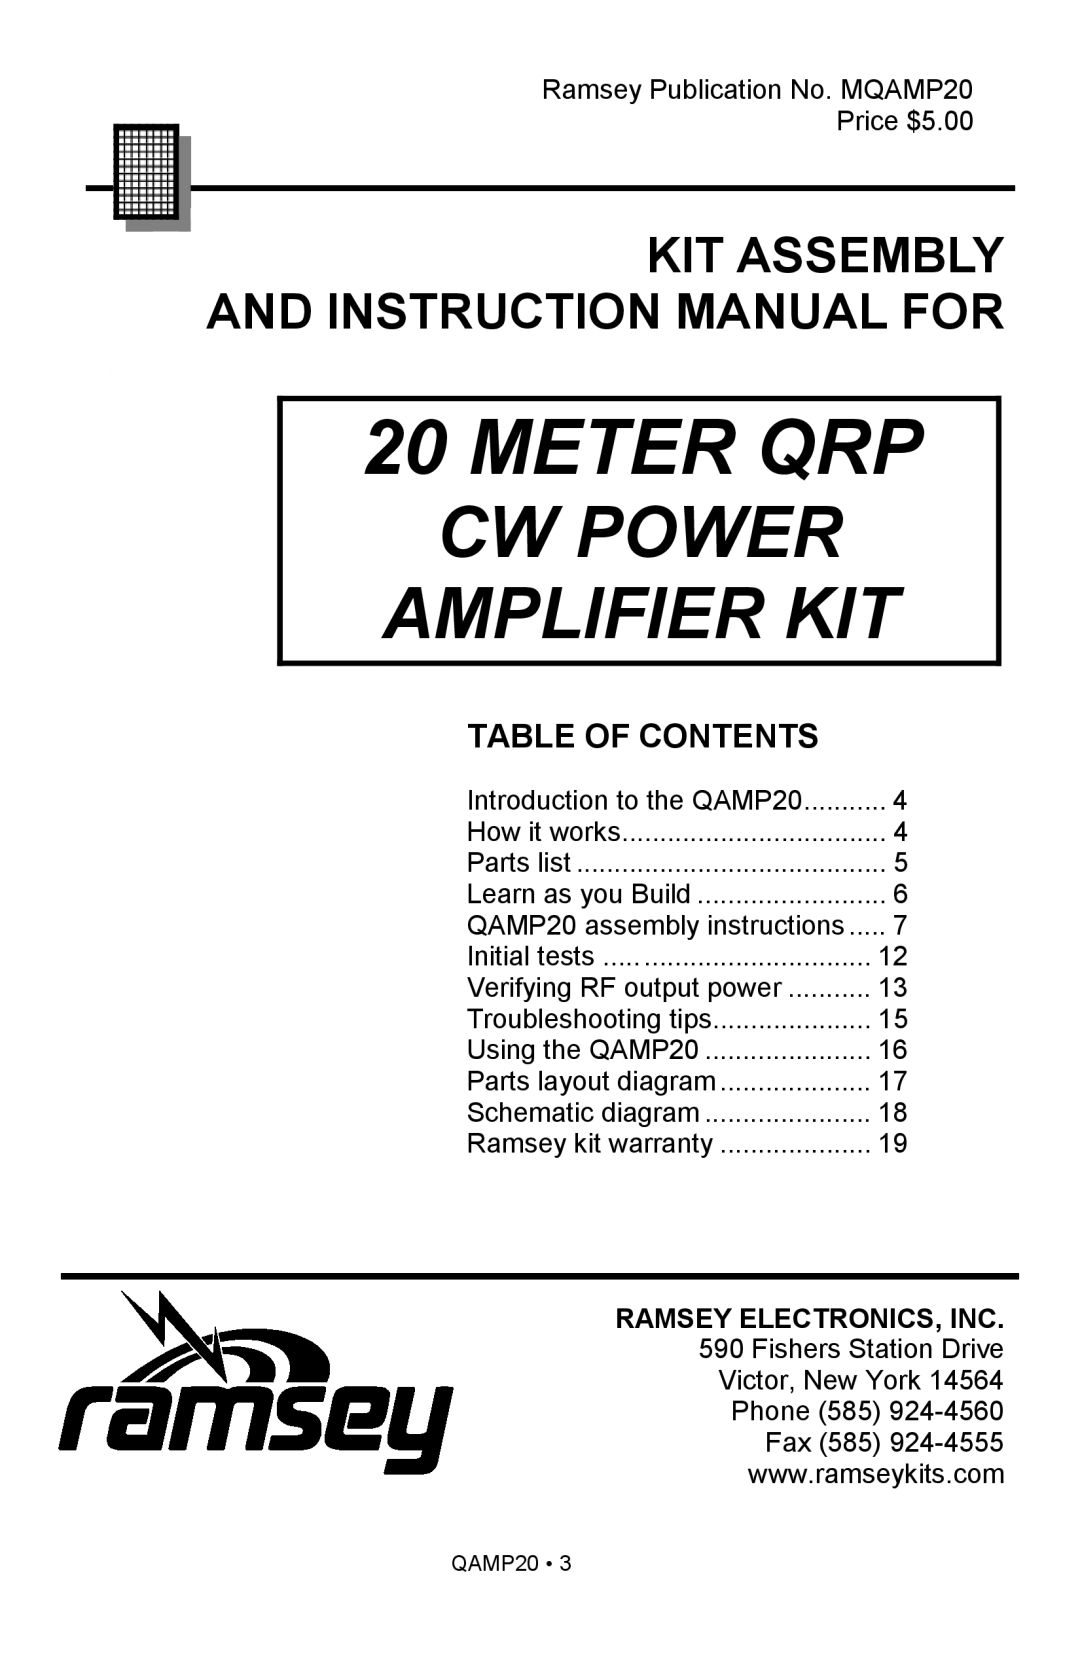 Ramsey Electronics QAMP20 manual Meter Qrp, Cw Power Amplifier Kit, Table Of Contents 